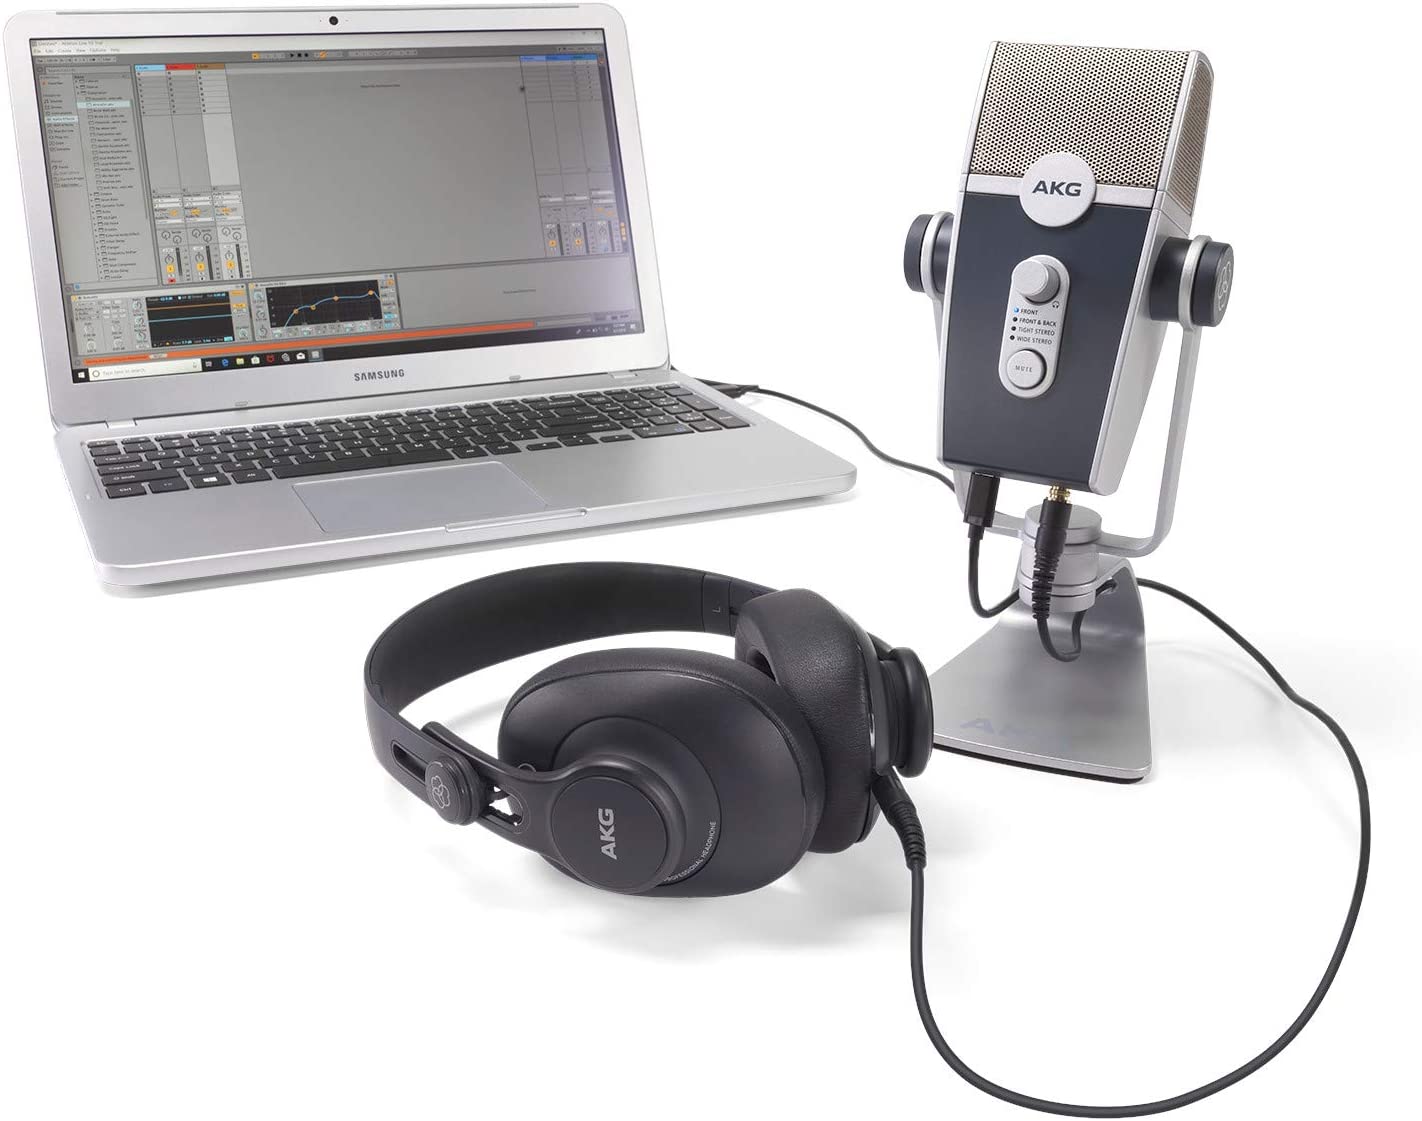 AKG Podcaster Essentials Lyra USB Microphone And K371 Headphones